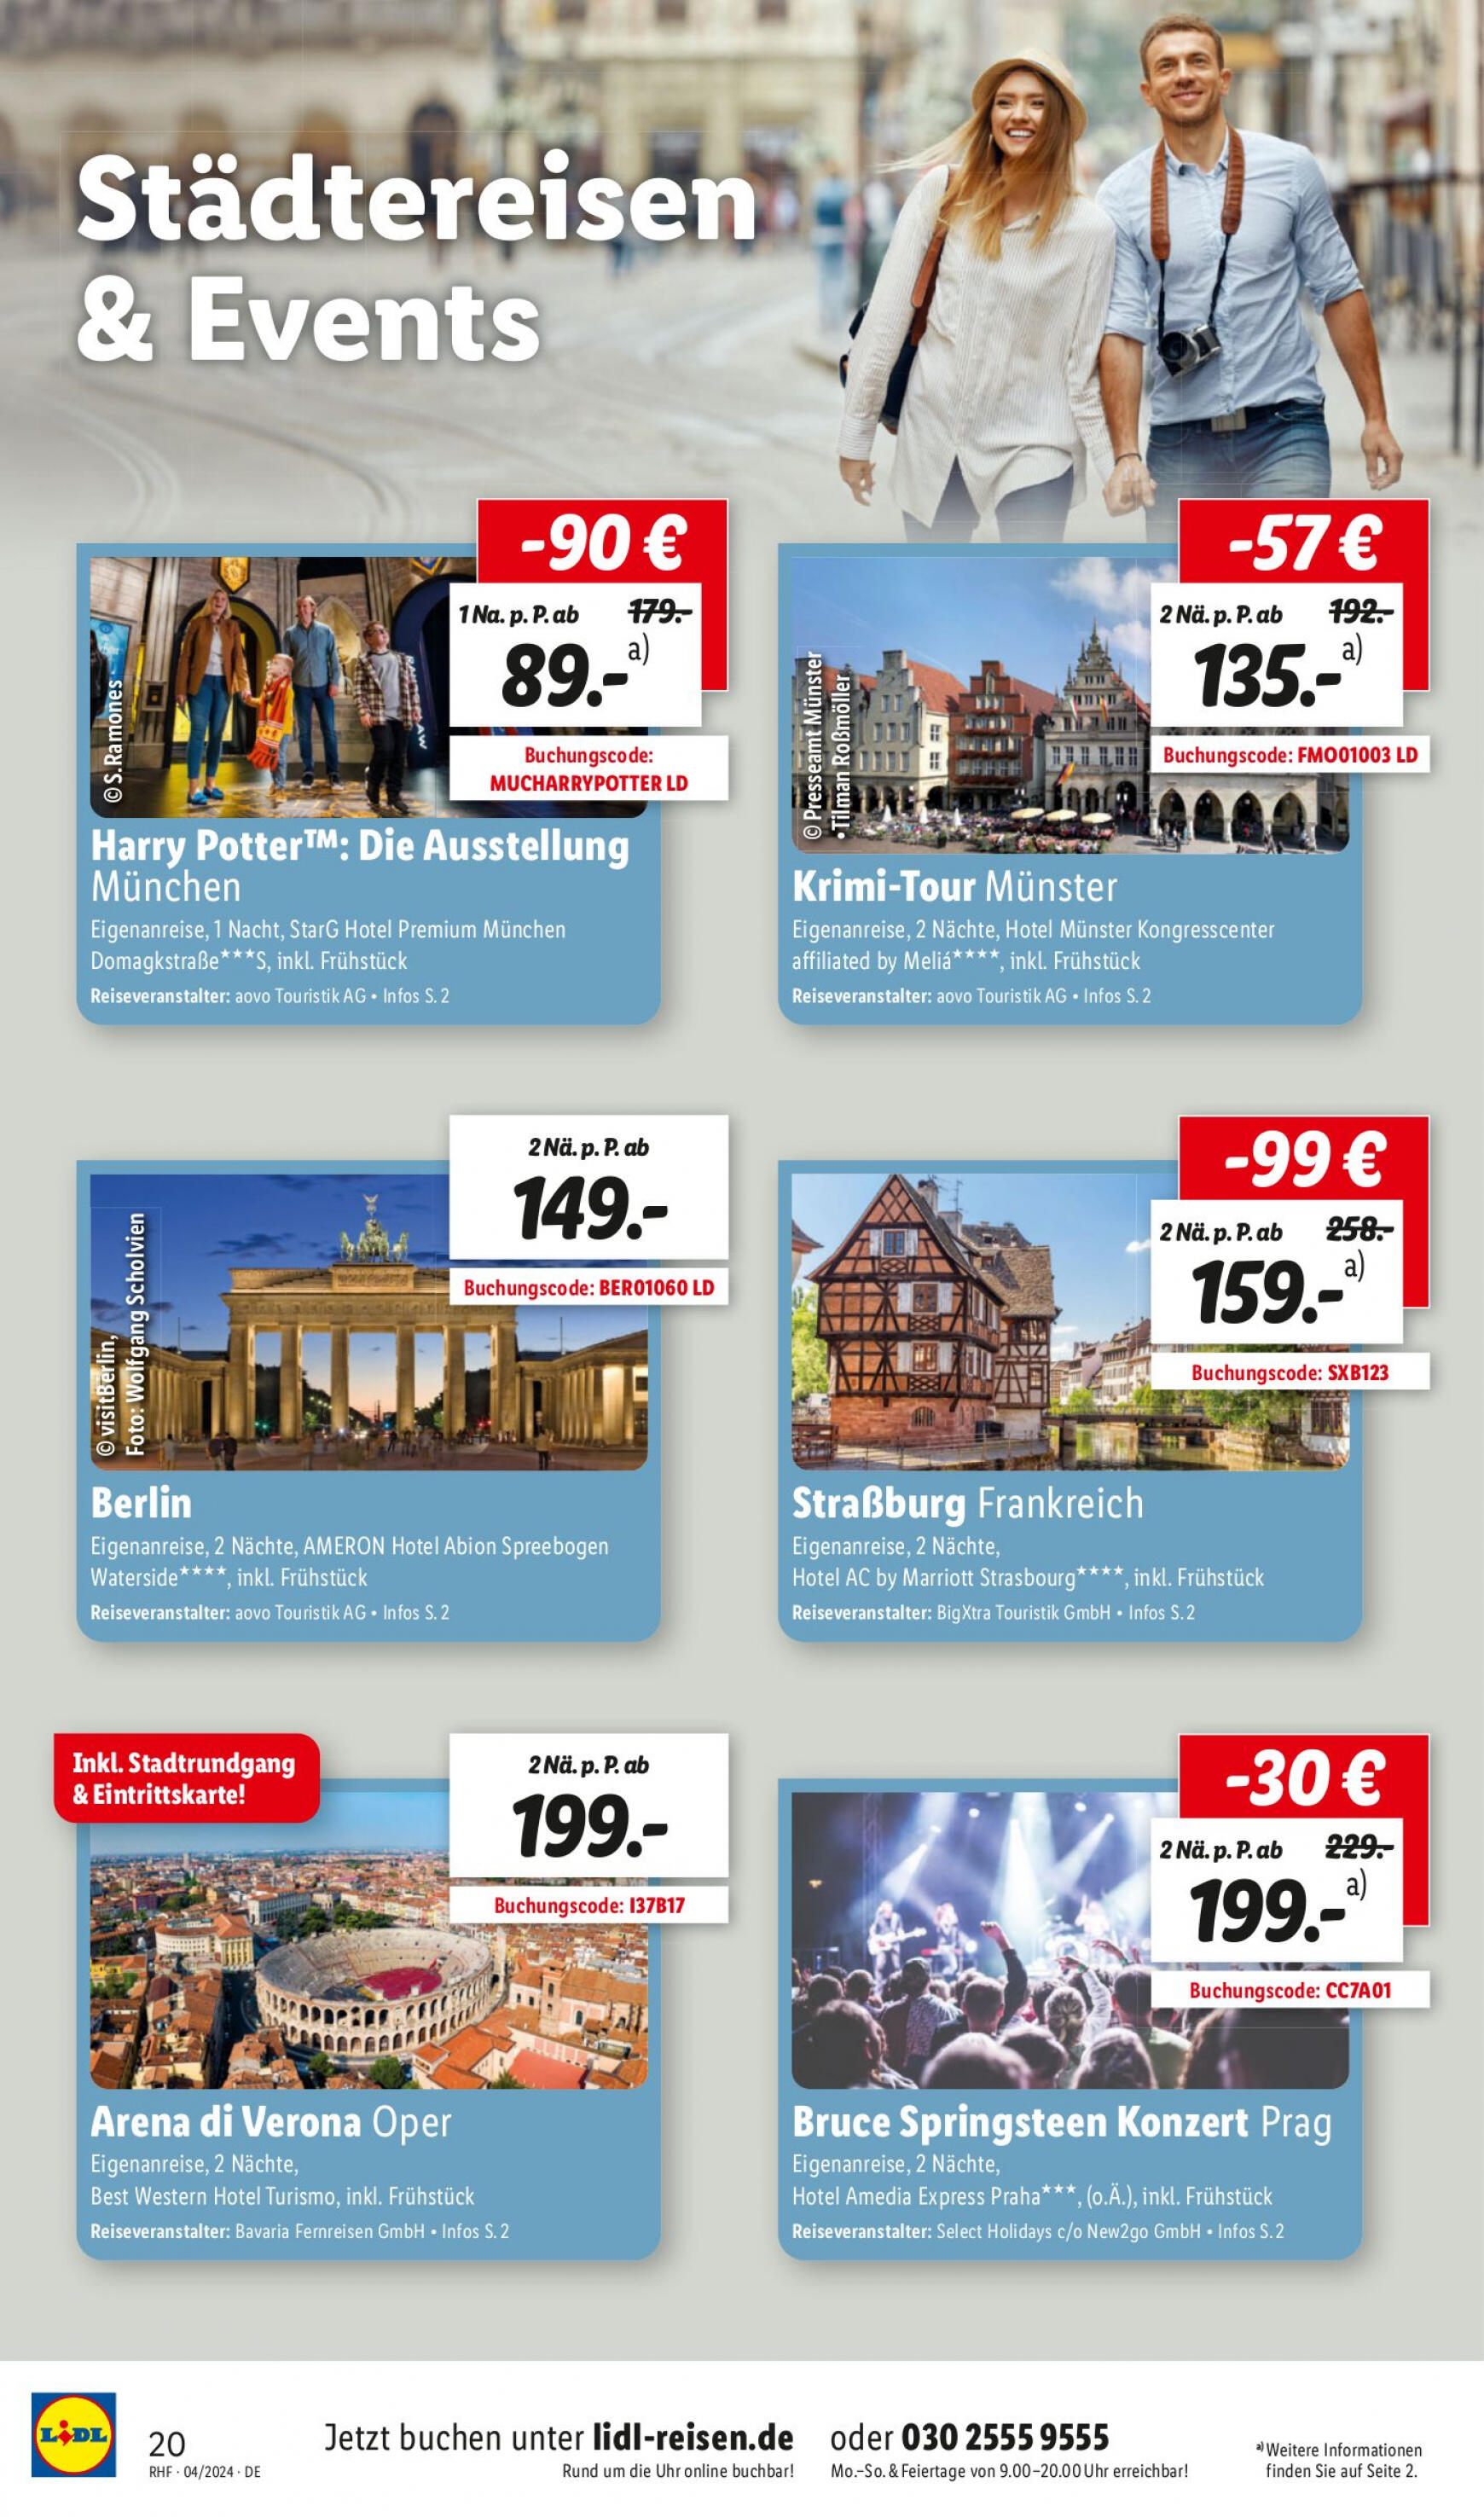 lidl - Flyer Lidl - April Reise-Highlights aktuell 27.03. - 30.04. - page: 20